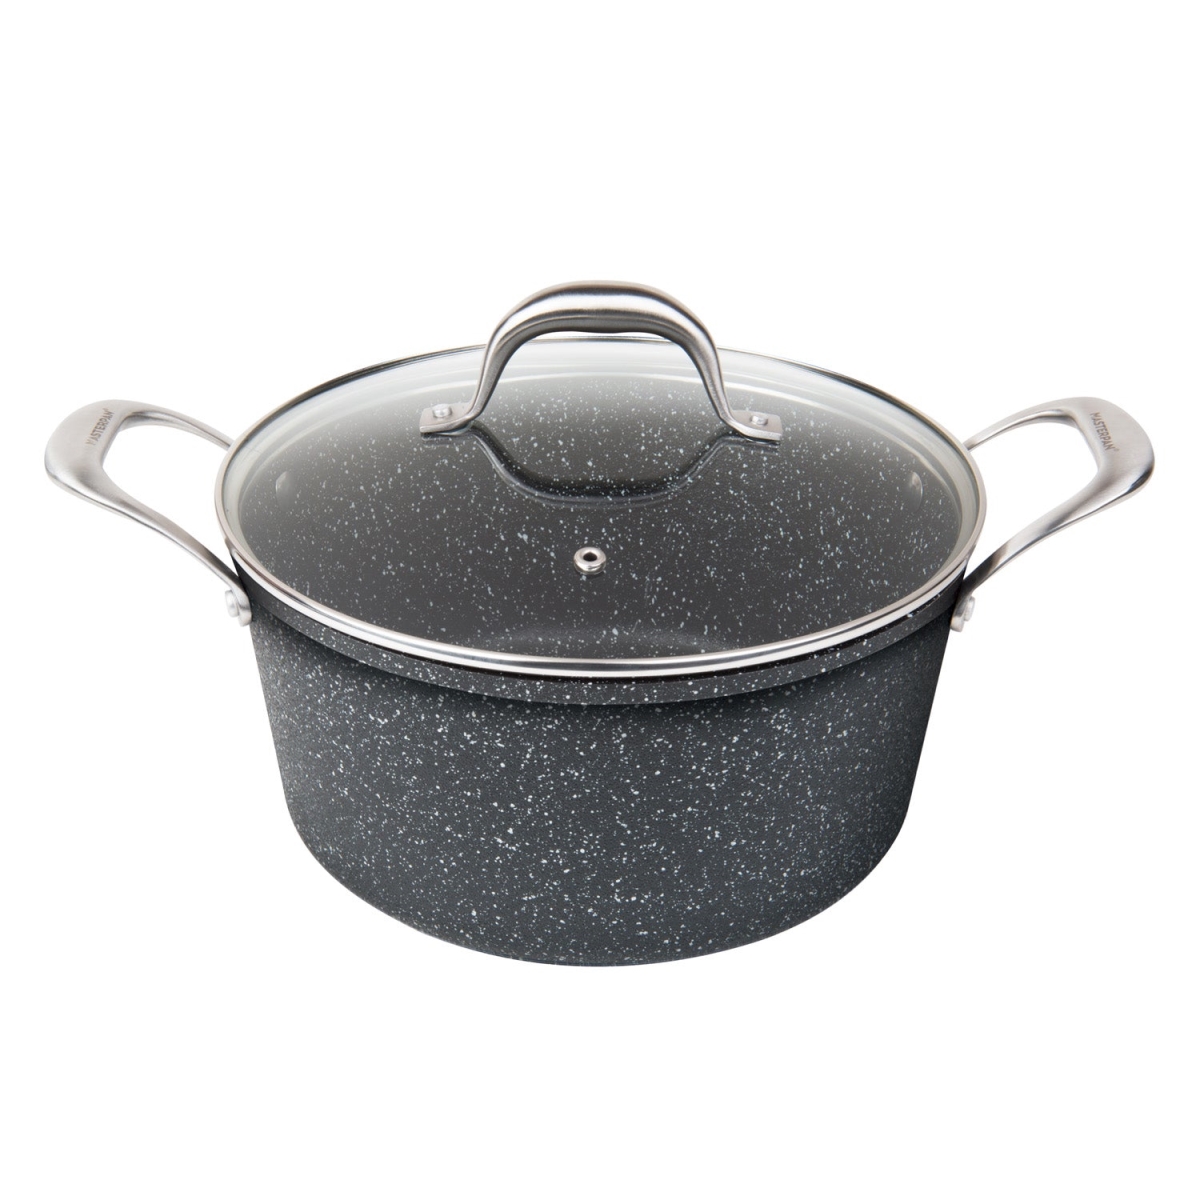 Picture of Masterpan MP-131 5 qt. x 9.5 in. Stock Pot with Glass Lid Non-Stick Cast Aluminum Granite Look Finish